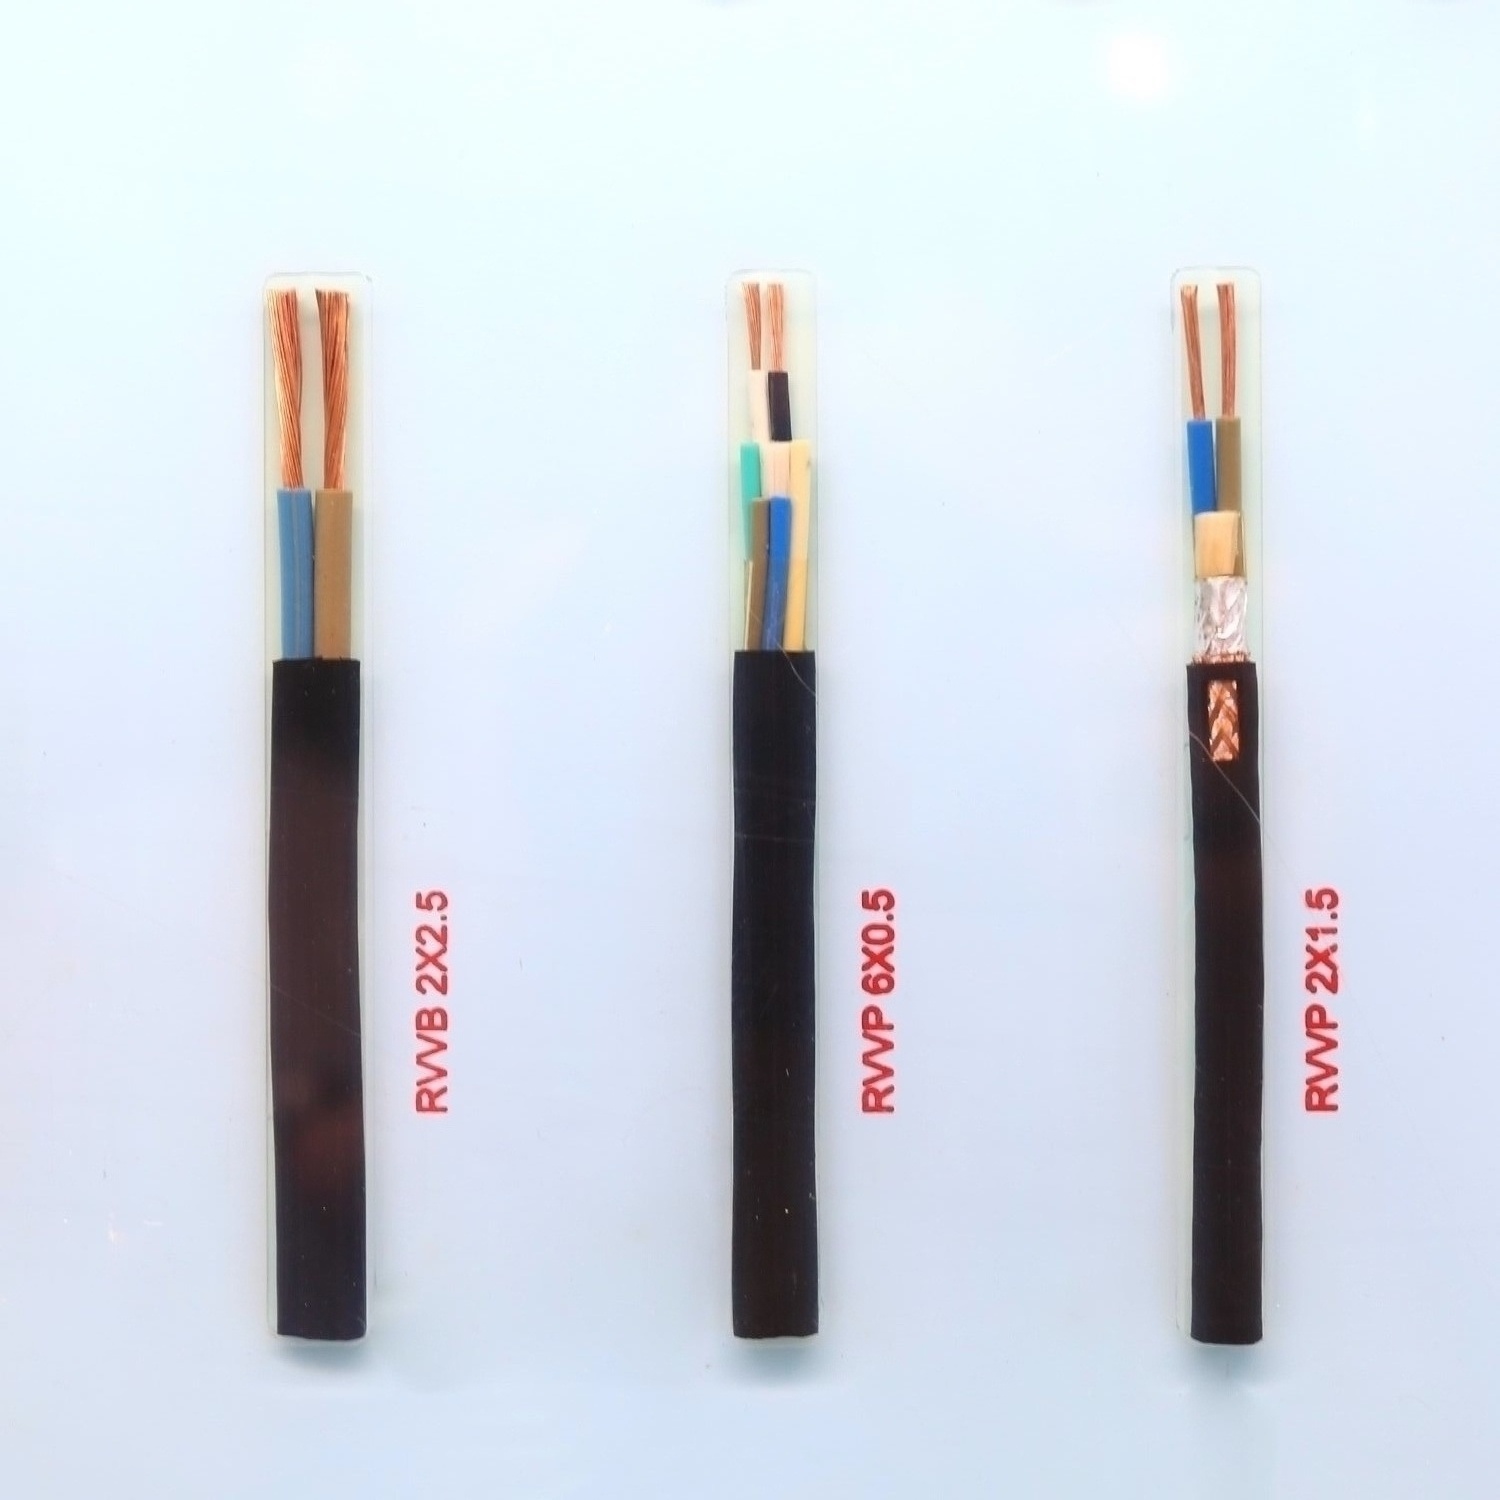 IEC60227 450/750V Single Core Two Cores Three Cores 3 X 1.5mm2 3 X 2.5mm2 3 X 4mm2 PVC Insulated and PVC Sheath Copper Wire Braiding Screen Flexible Cable